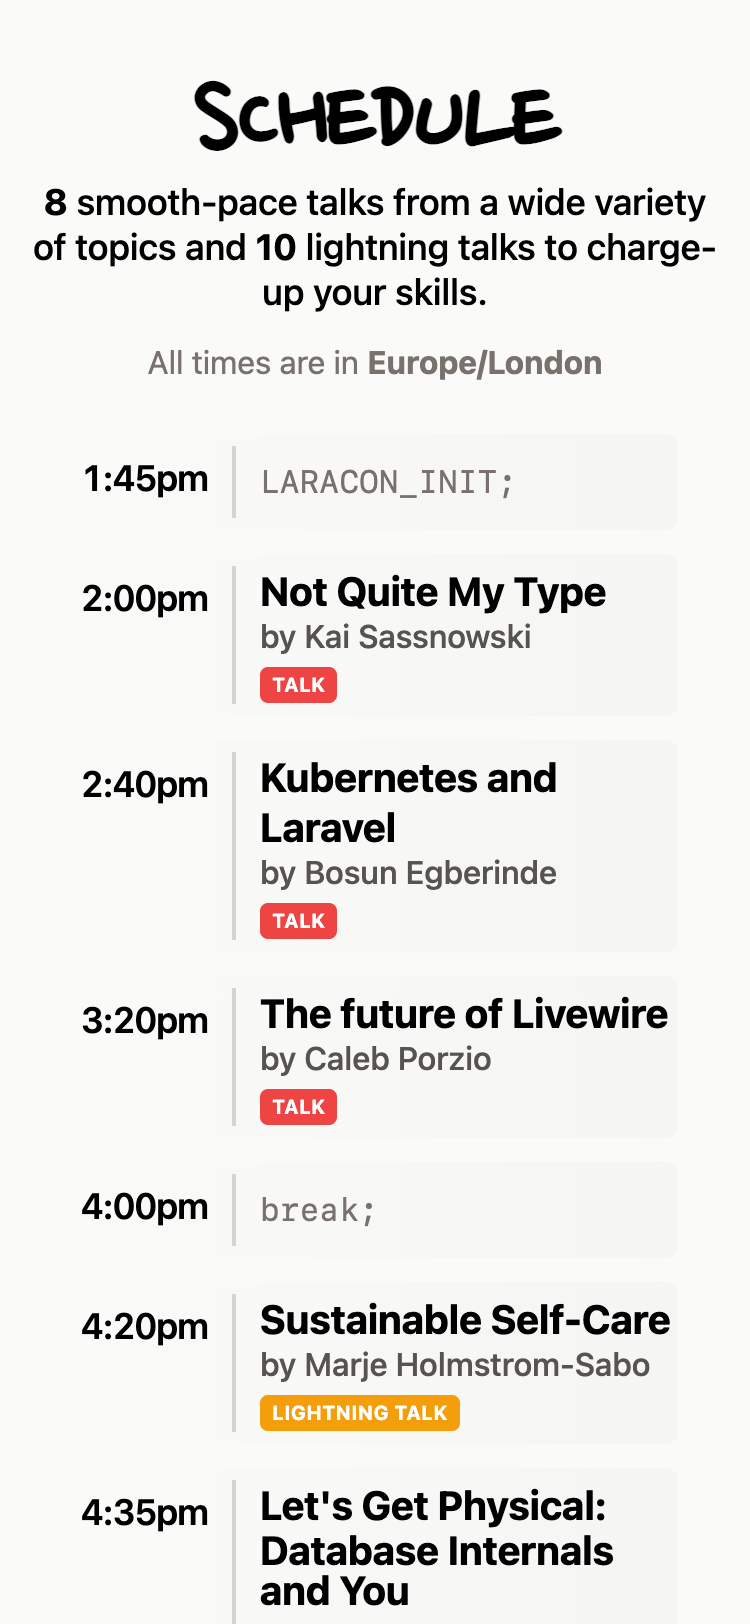 Mobile screenshot of the 'Schedule' section of the Laracon Online website. The conference schedule is listed with start times on the left and titles and speakers on the right.